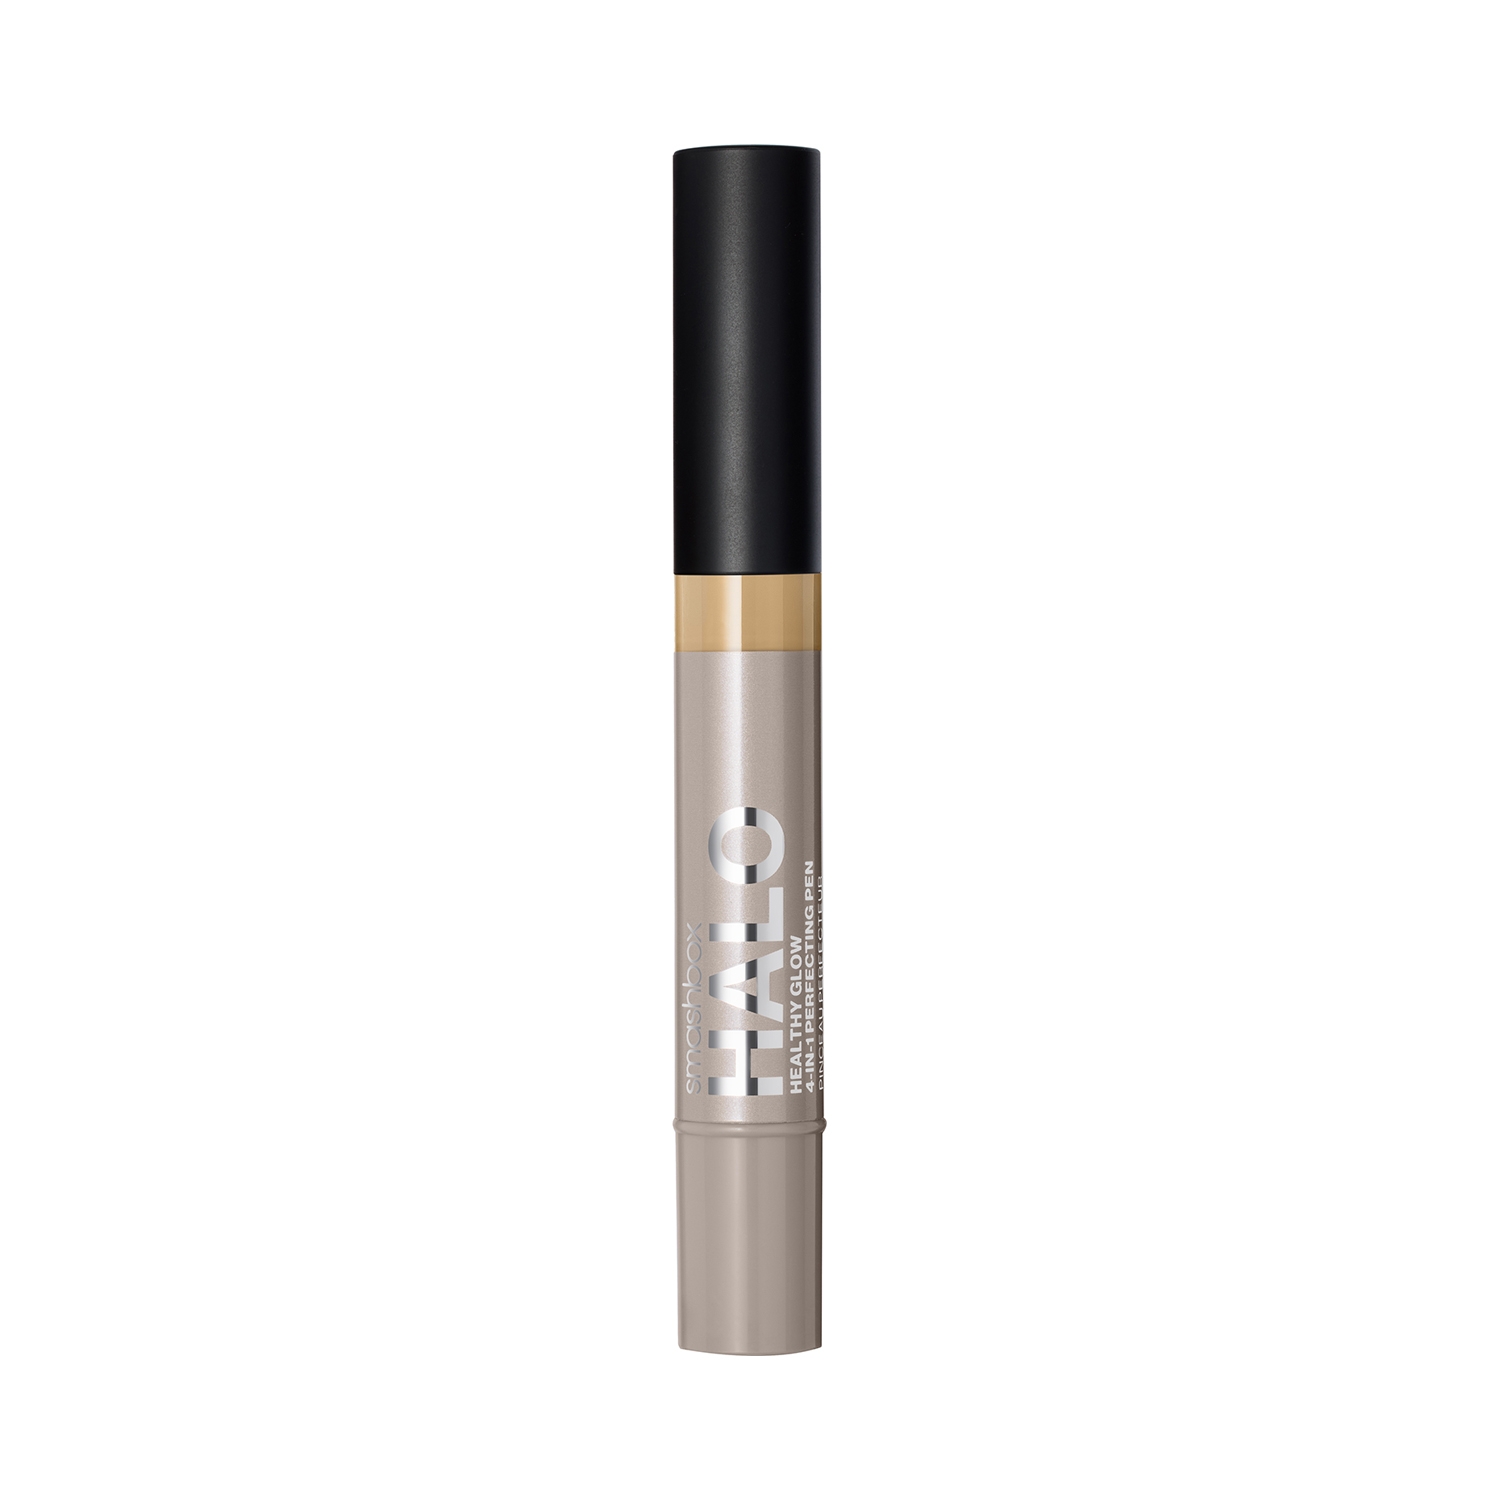 Smashbox | Smashbox Halo Healthy Glow 4-In-1 Perfecting Concealer Pen - L20W (3.5ml)